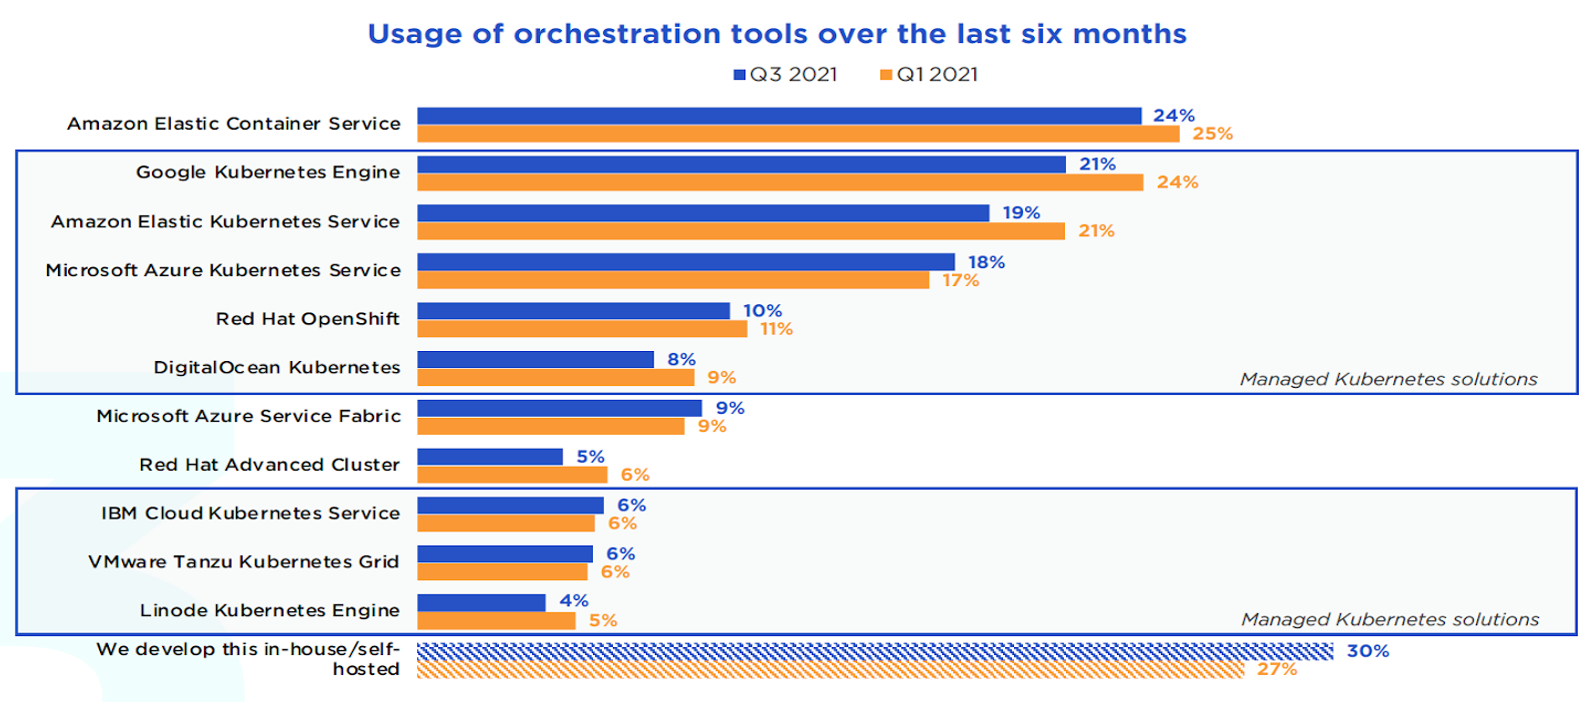 Graphic showing survey results for orchestration tools used over the last six months.